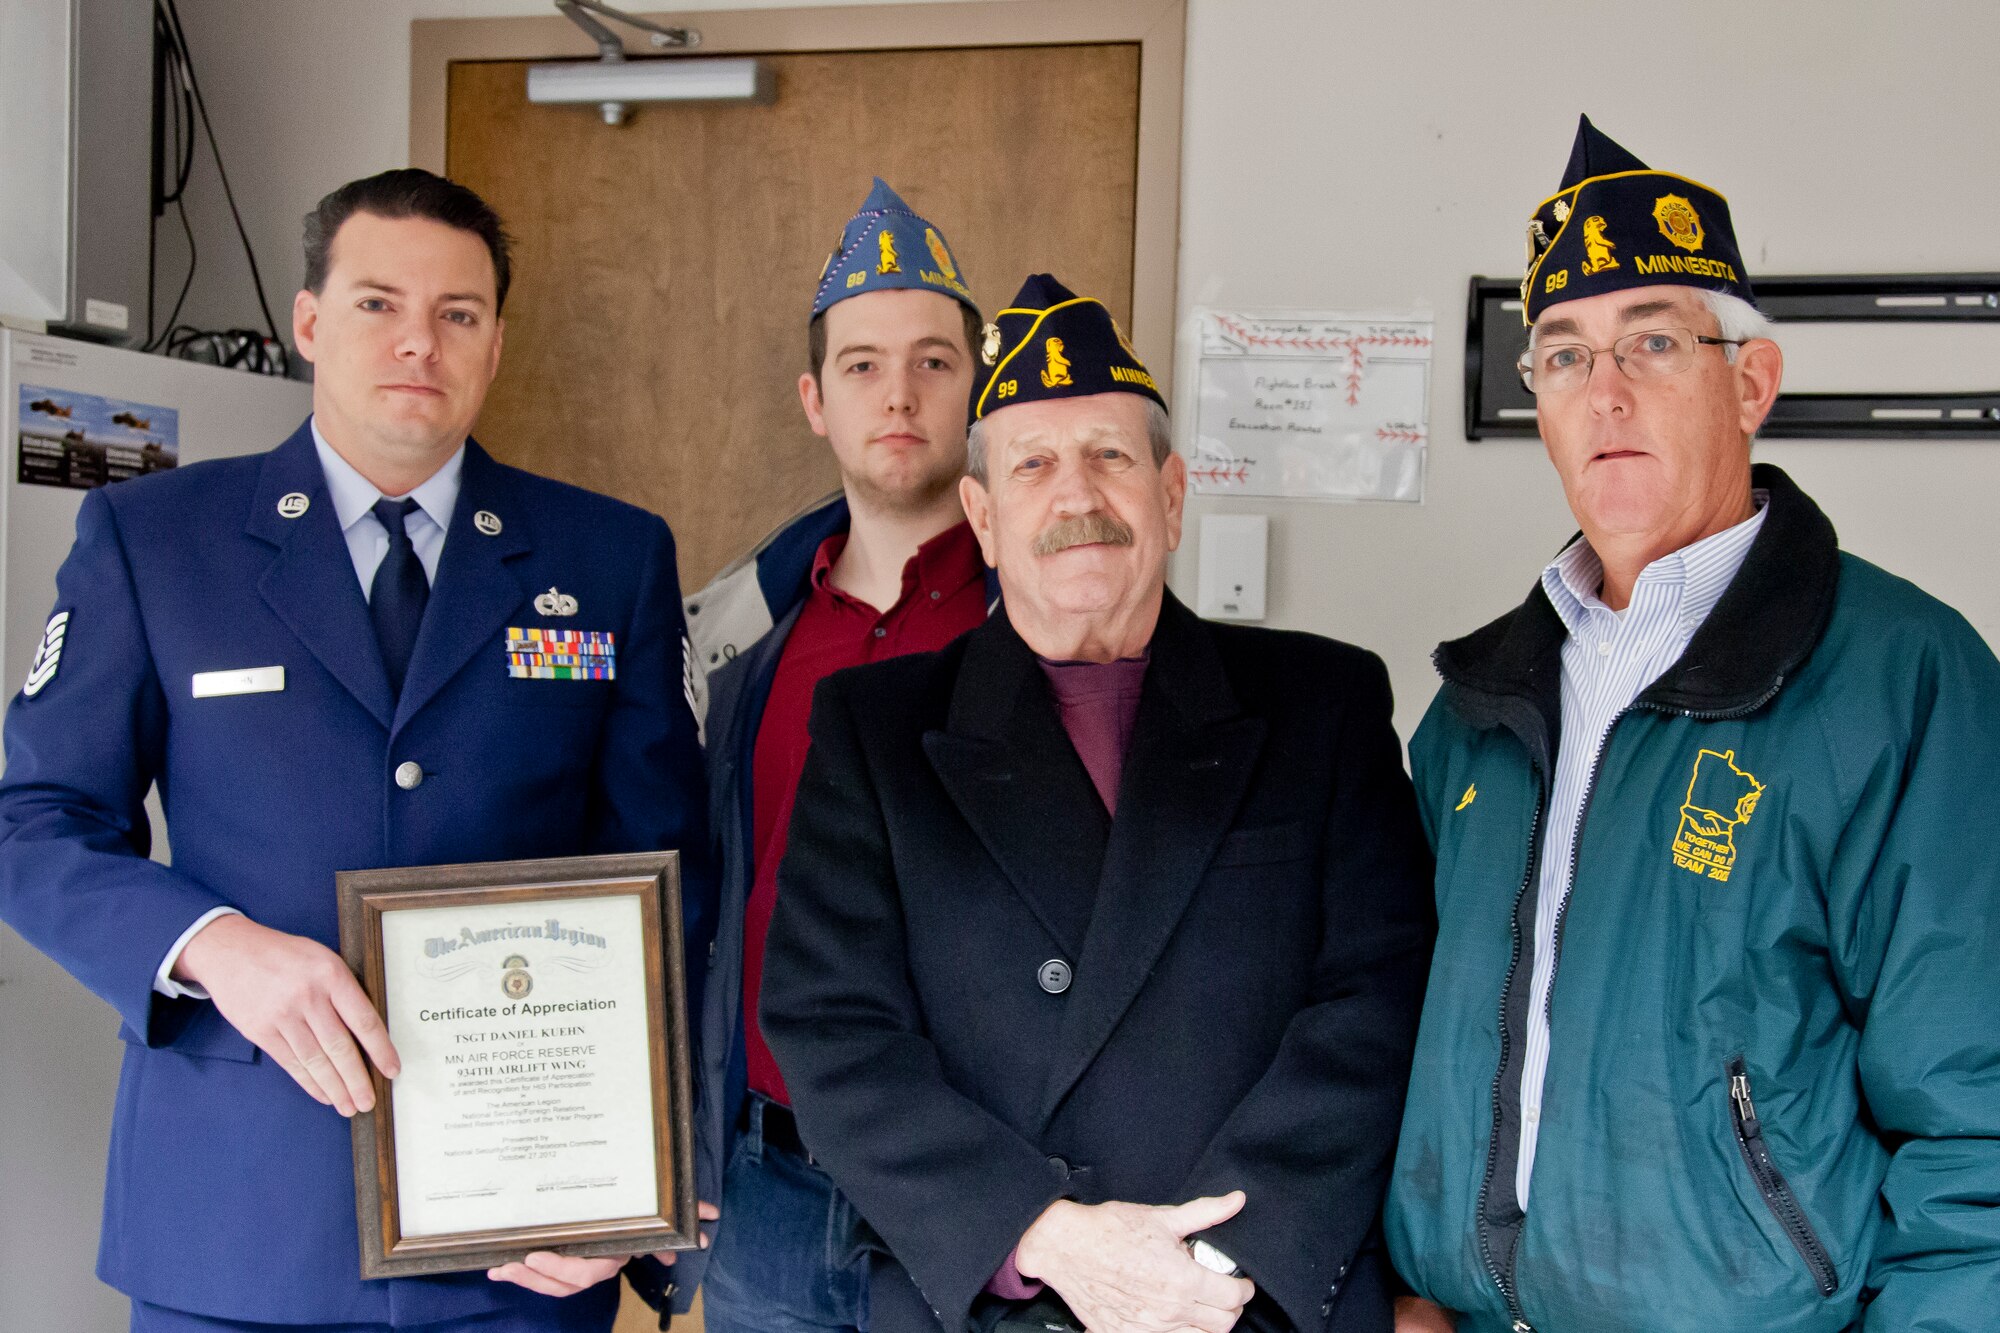 From American Legion Post #99, Commander Roger Fahrenkrug, Joe Bayer, and John Bayer present a Certificate of Appreciation to Tech. Sgt. Dan Kuehn, 934th Aircraft Maintenance Squadron at the Minneapolis-St. Paul Air Reserve Station, Minn. (U.S. Air Force Photo/Shannon McKay)